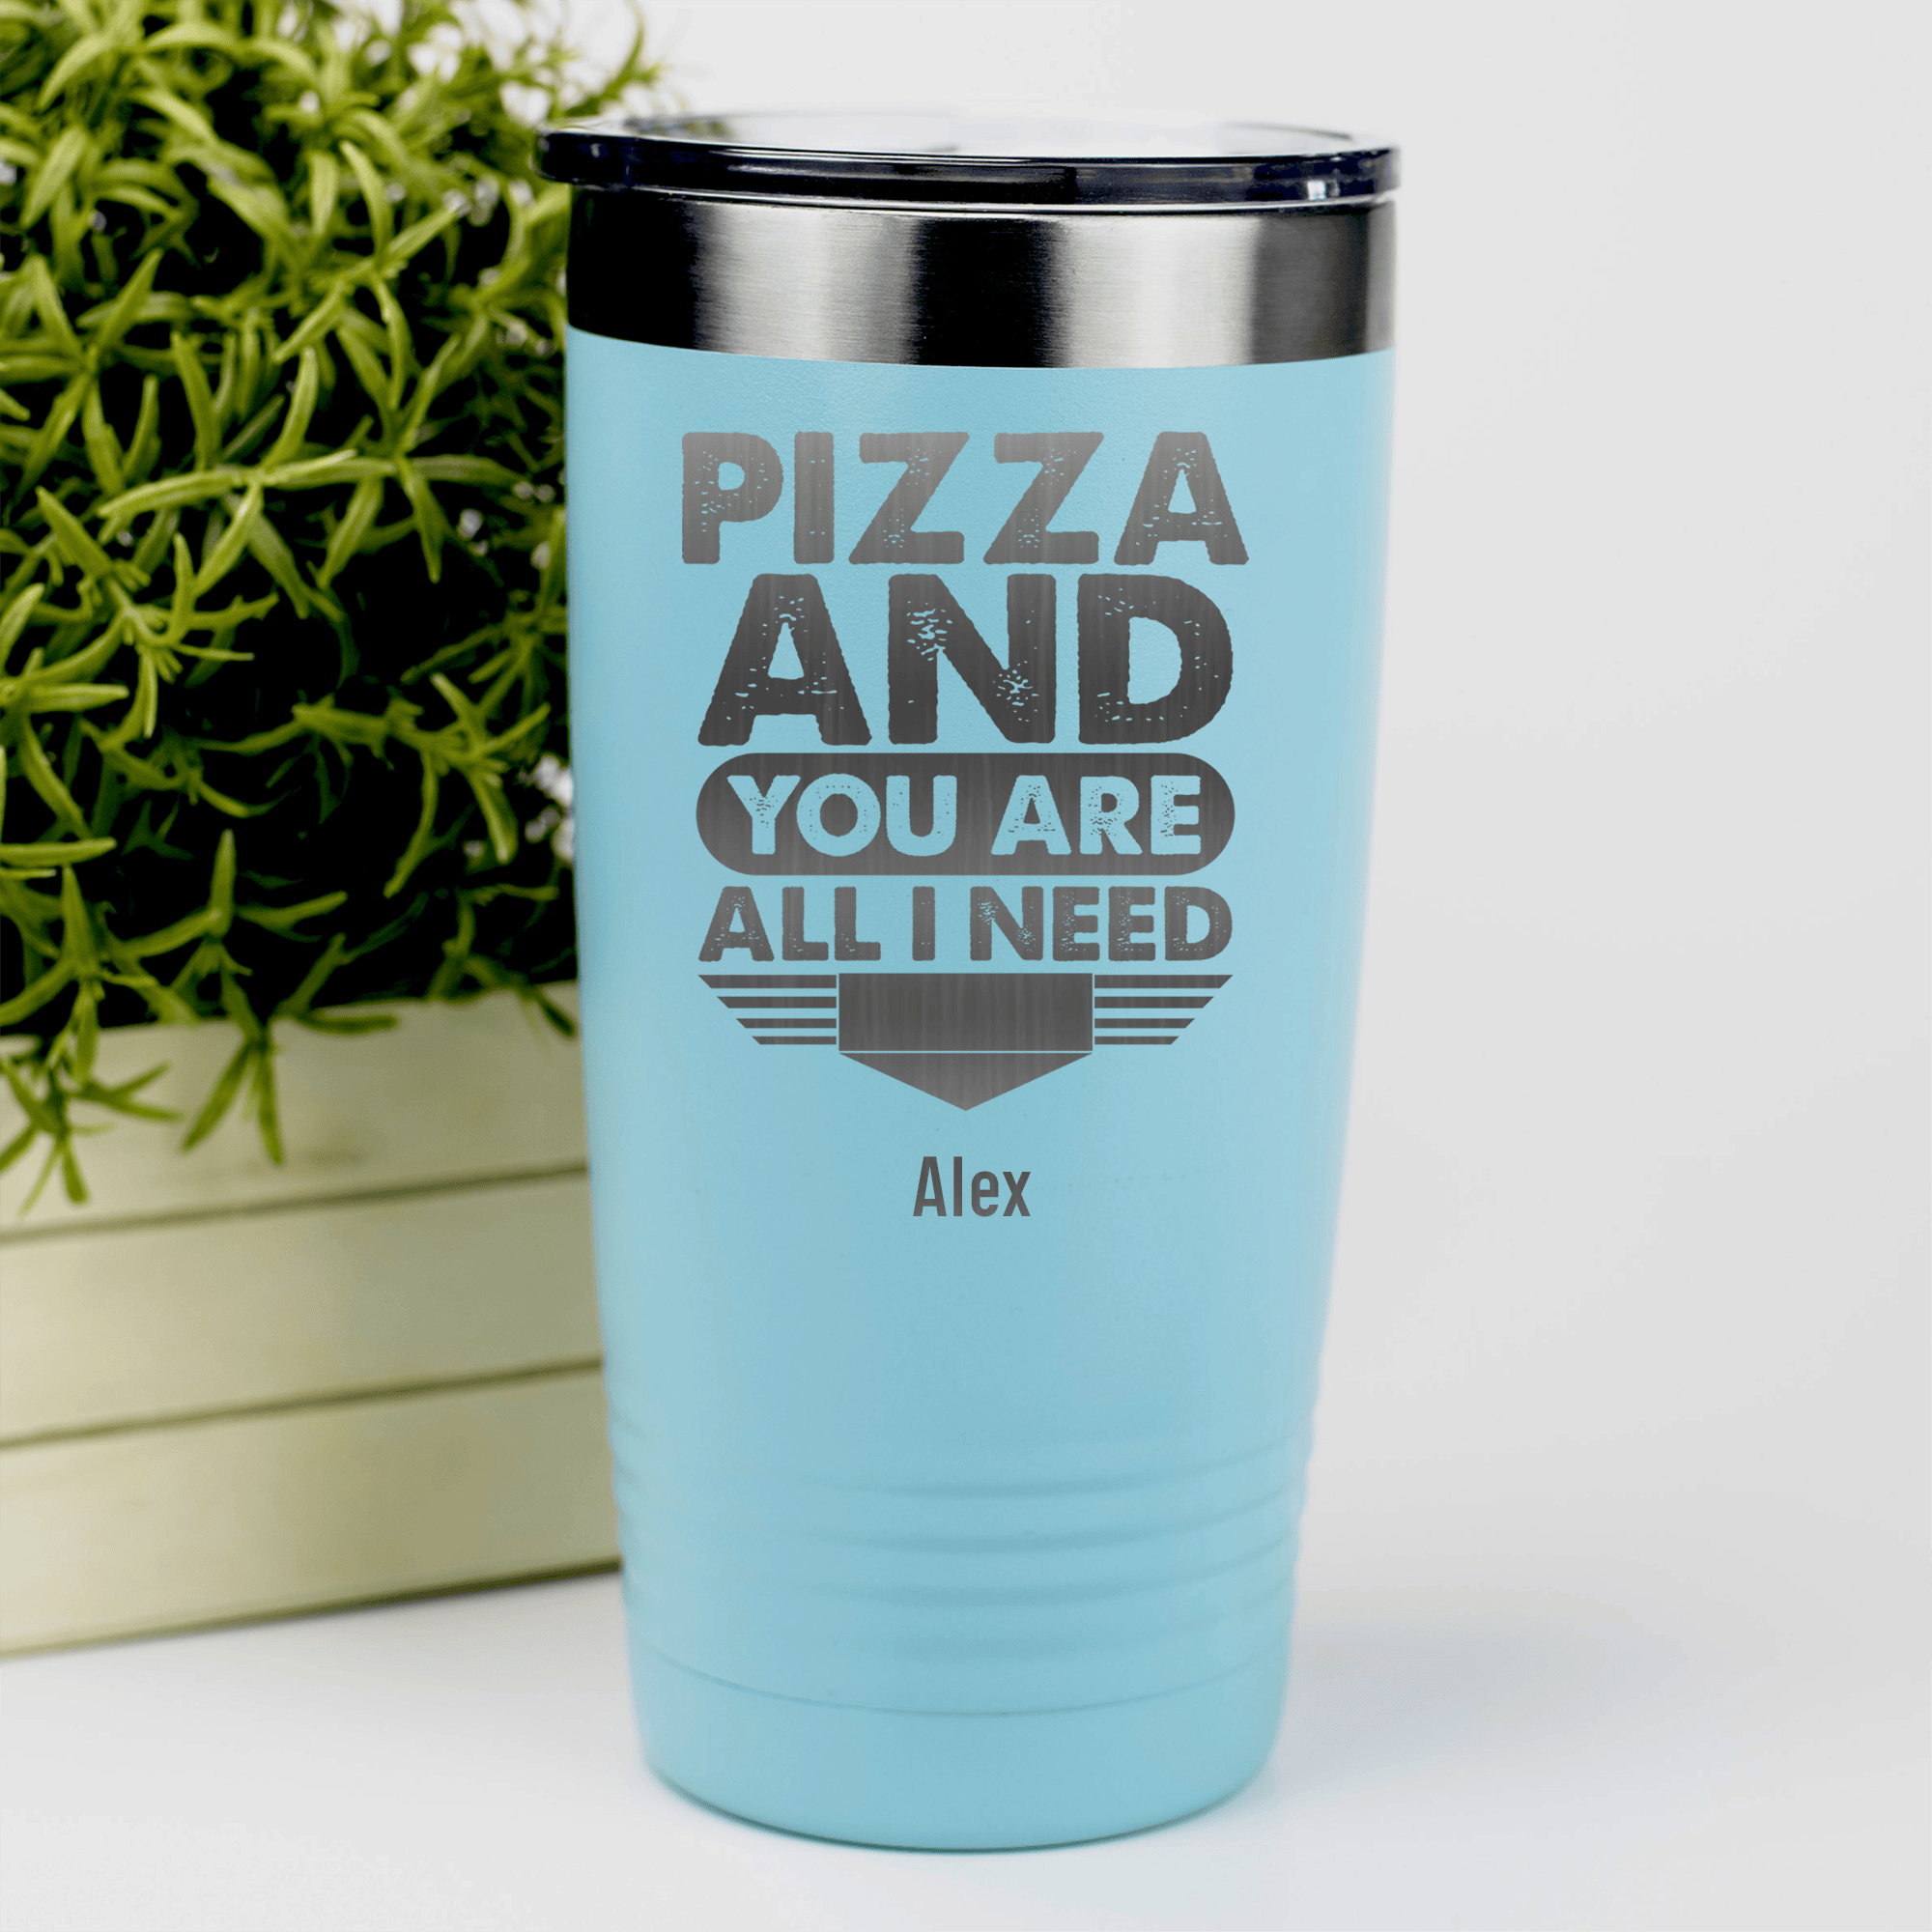 Teal Best Friend Tumbler With Pizza And You Are All I Need Design